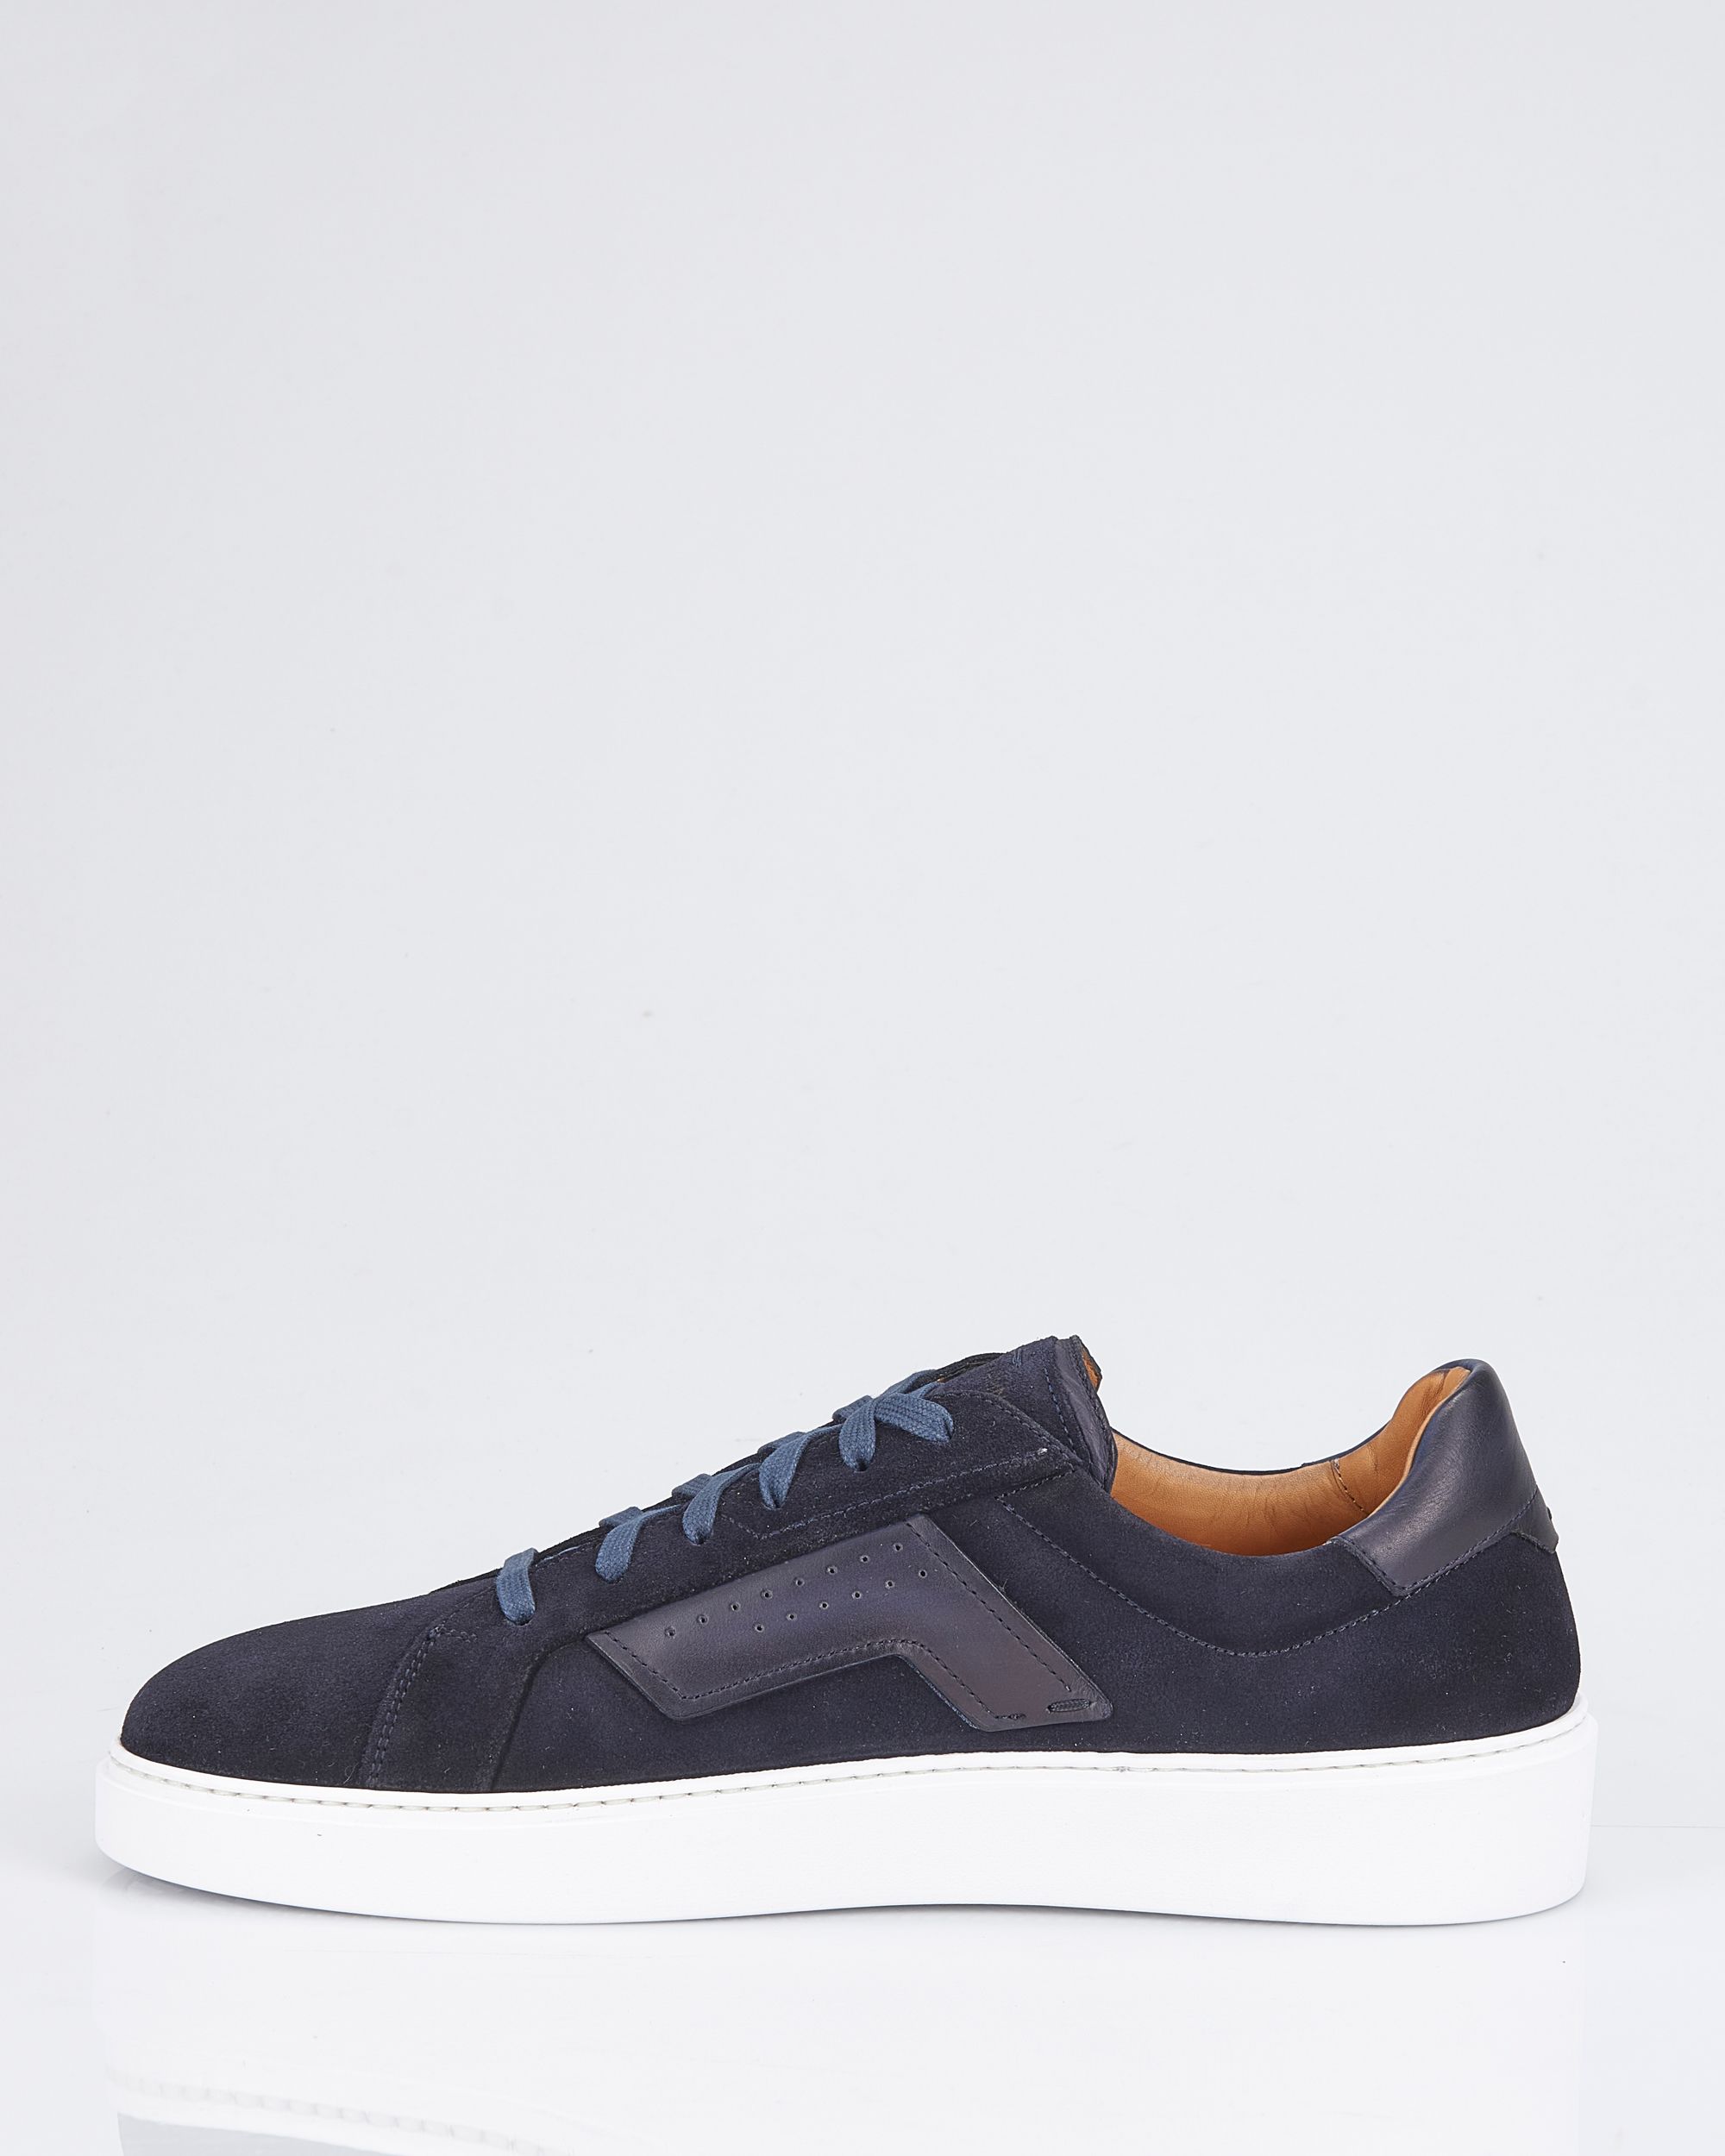 Magnanni Sneakers Donker blauw 086803-001-41